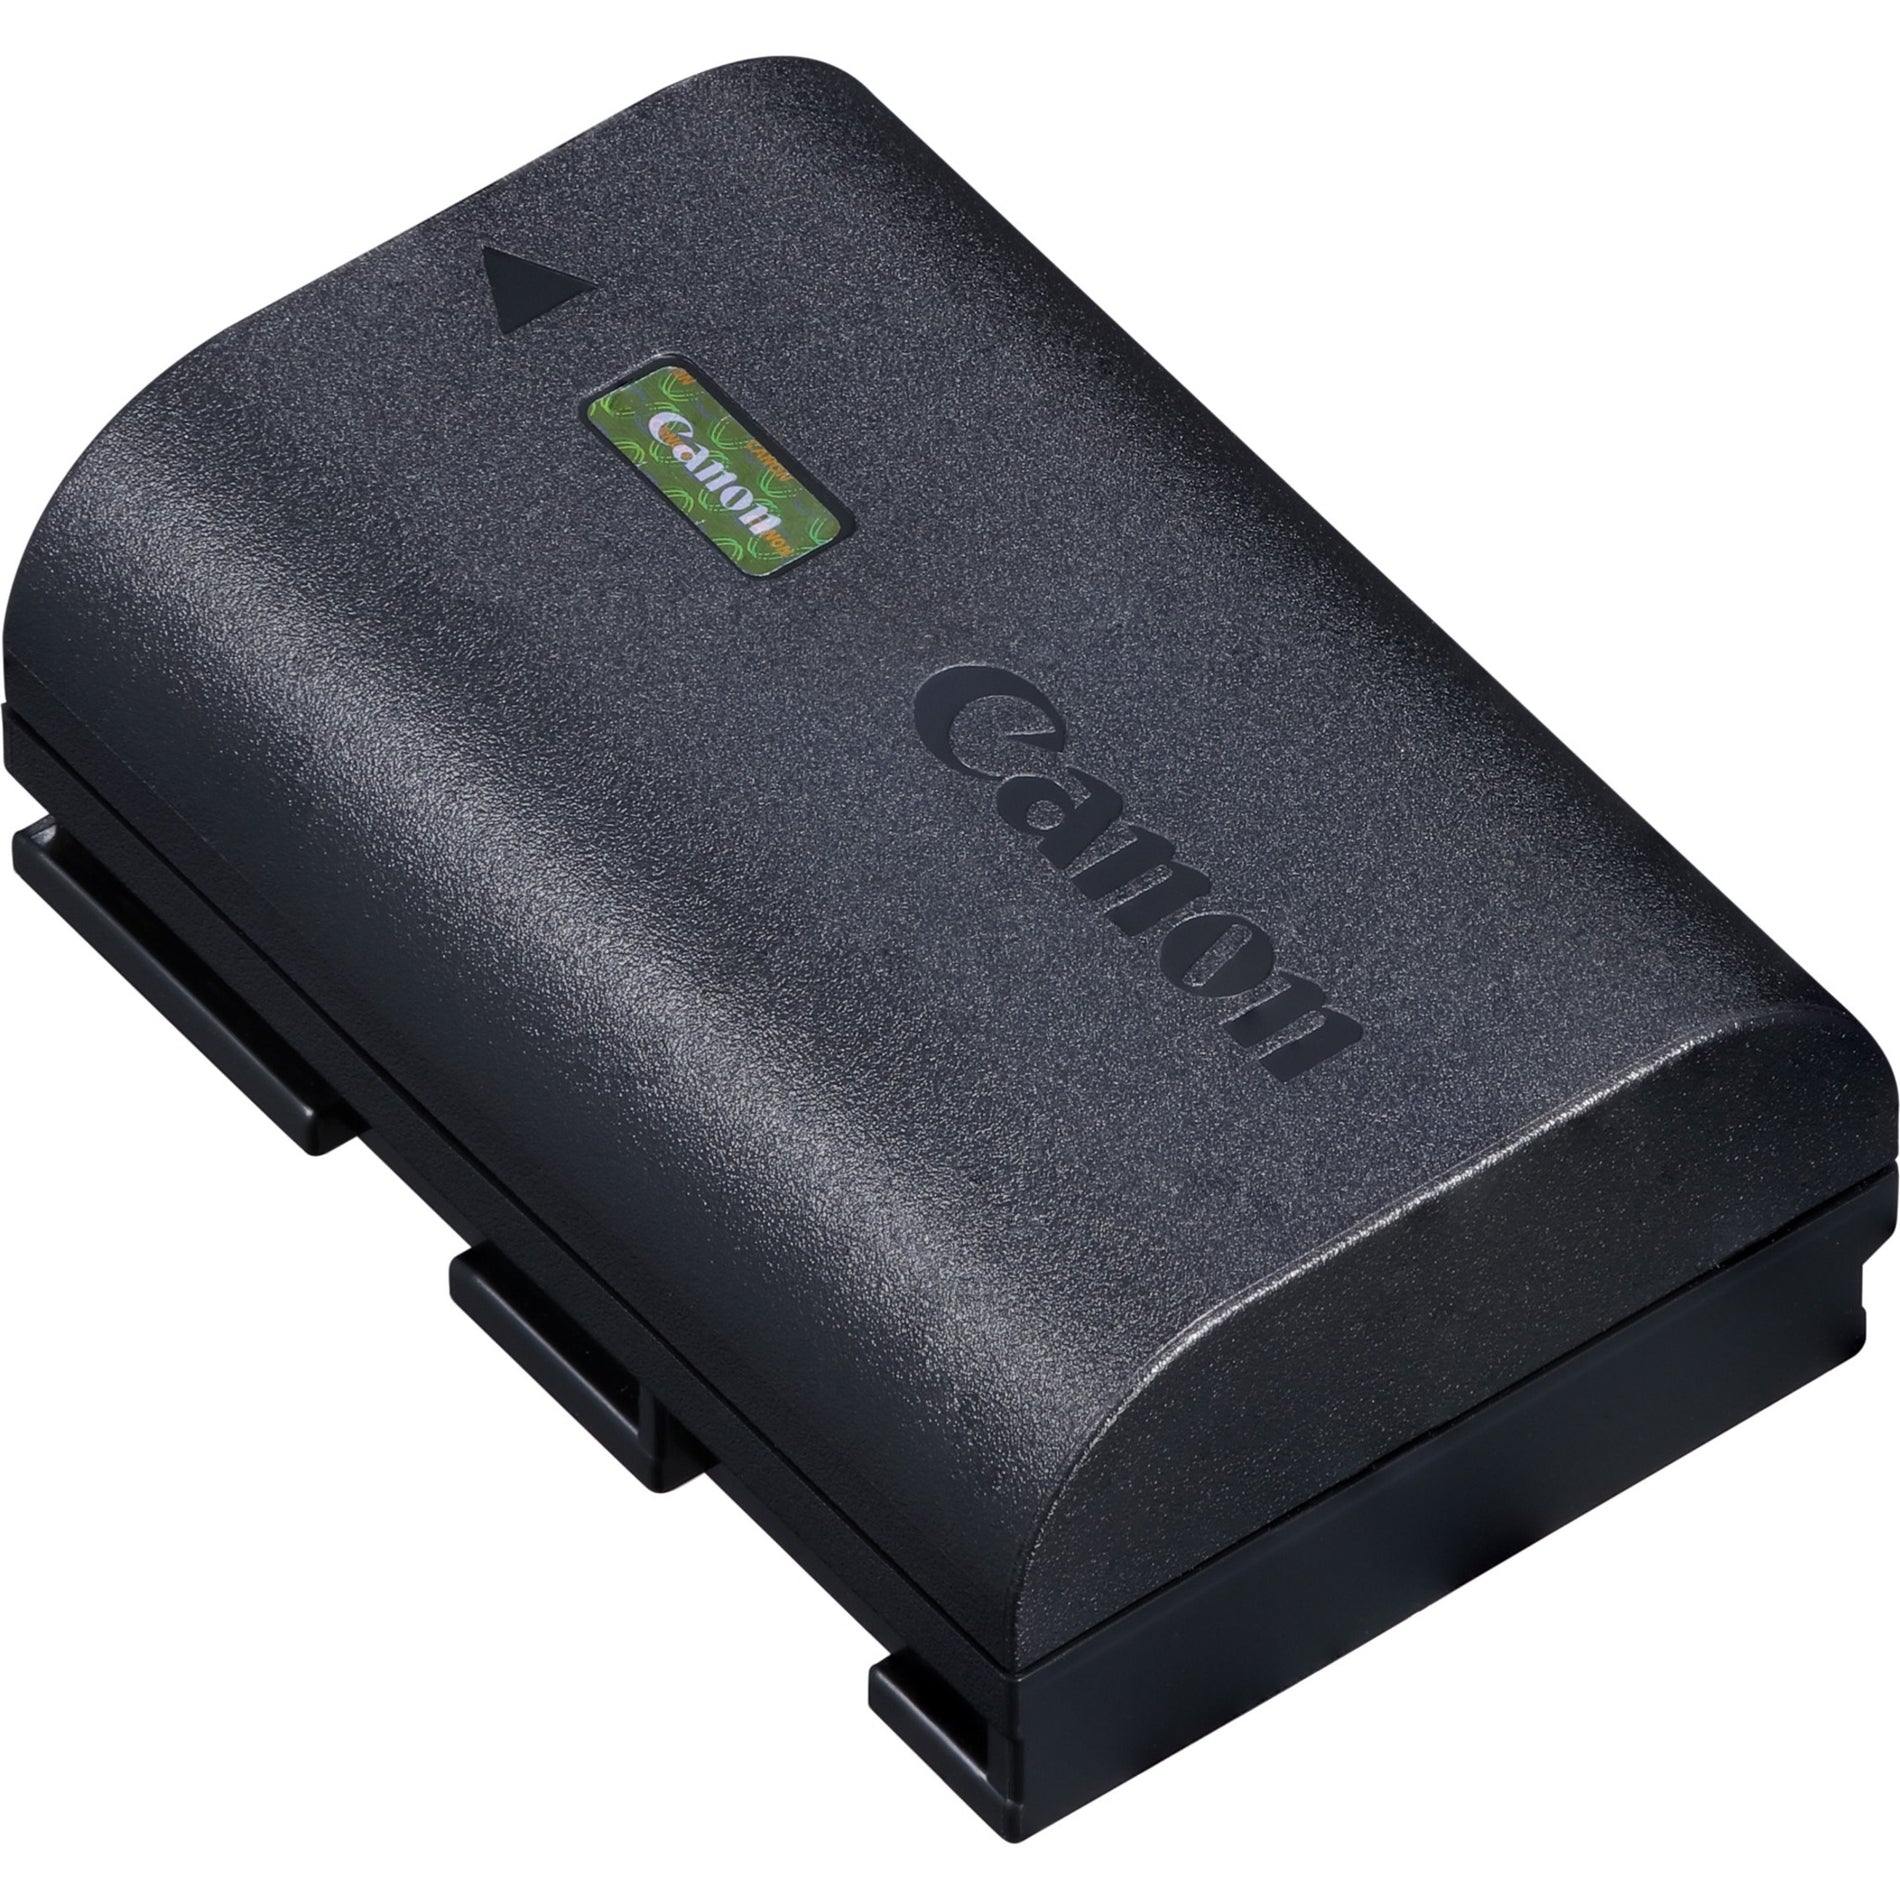 Canon 4132C002 Battery Pack LP-E6NH, 1 Year Limited Warranty, 2130mAh, Lithium Ion (Li-Ion)